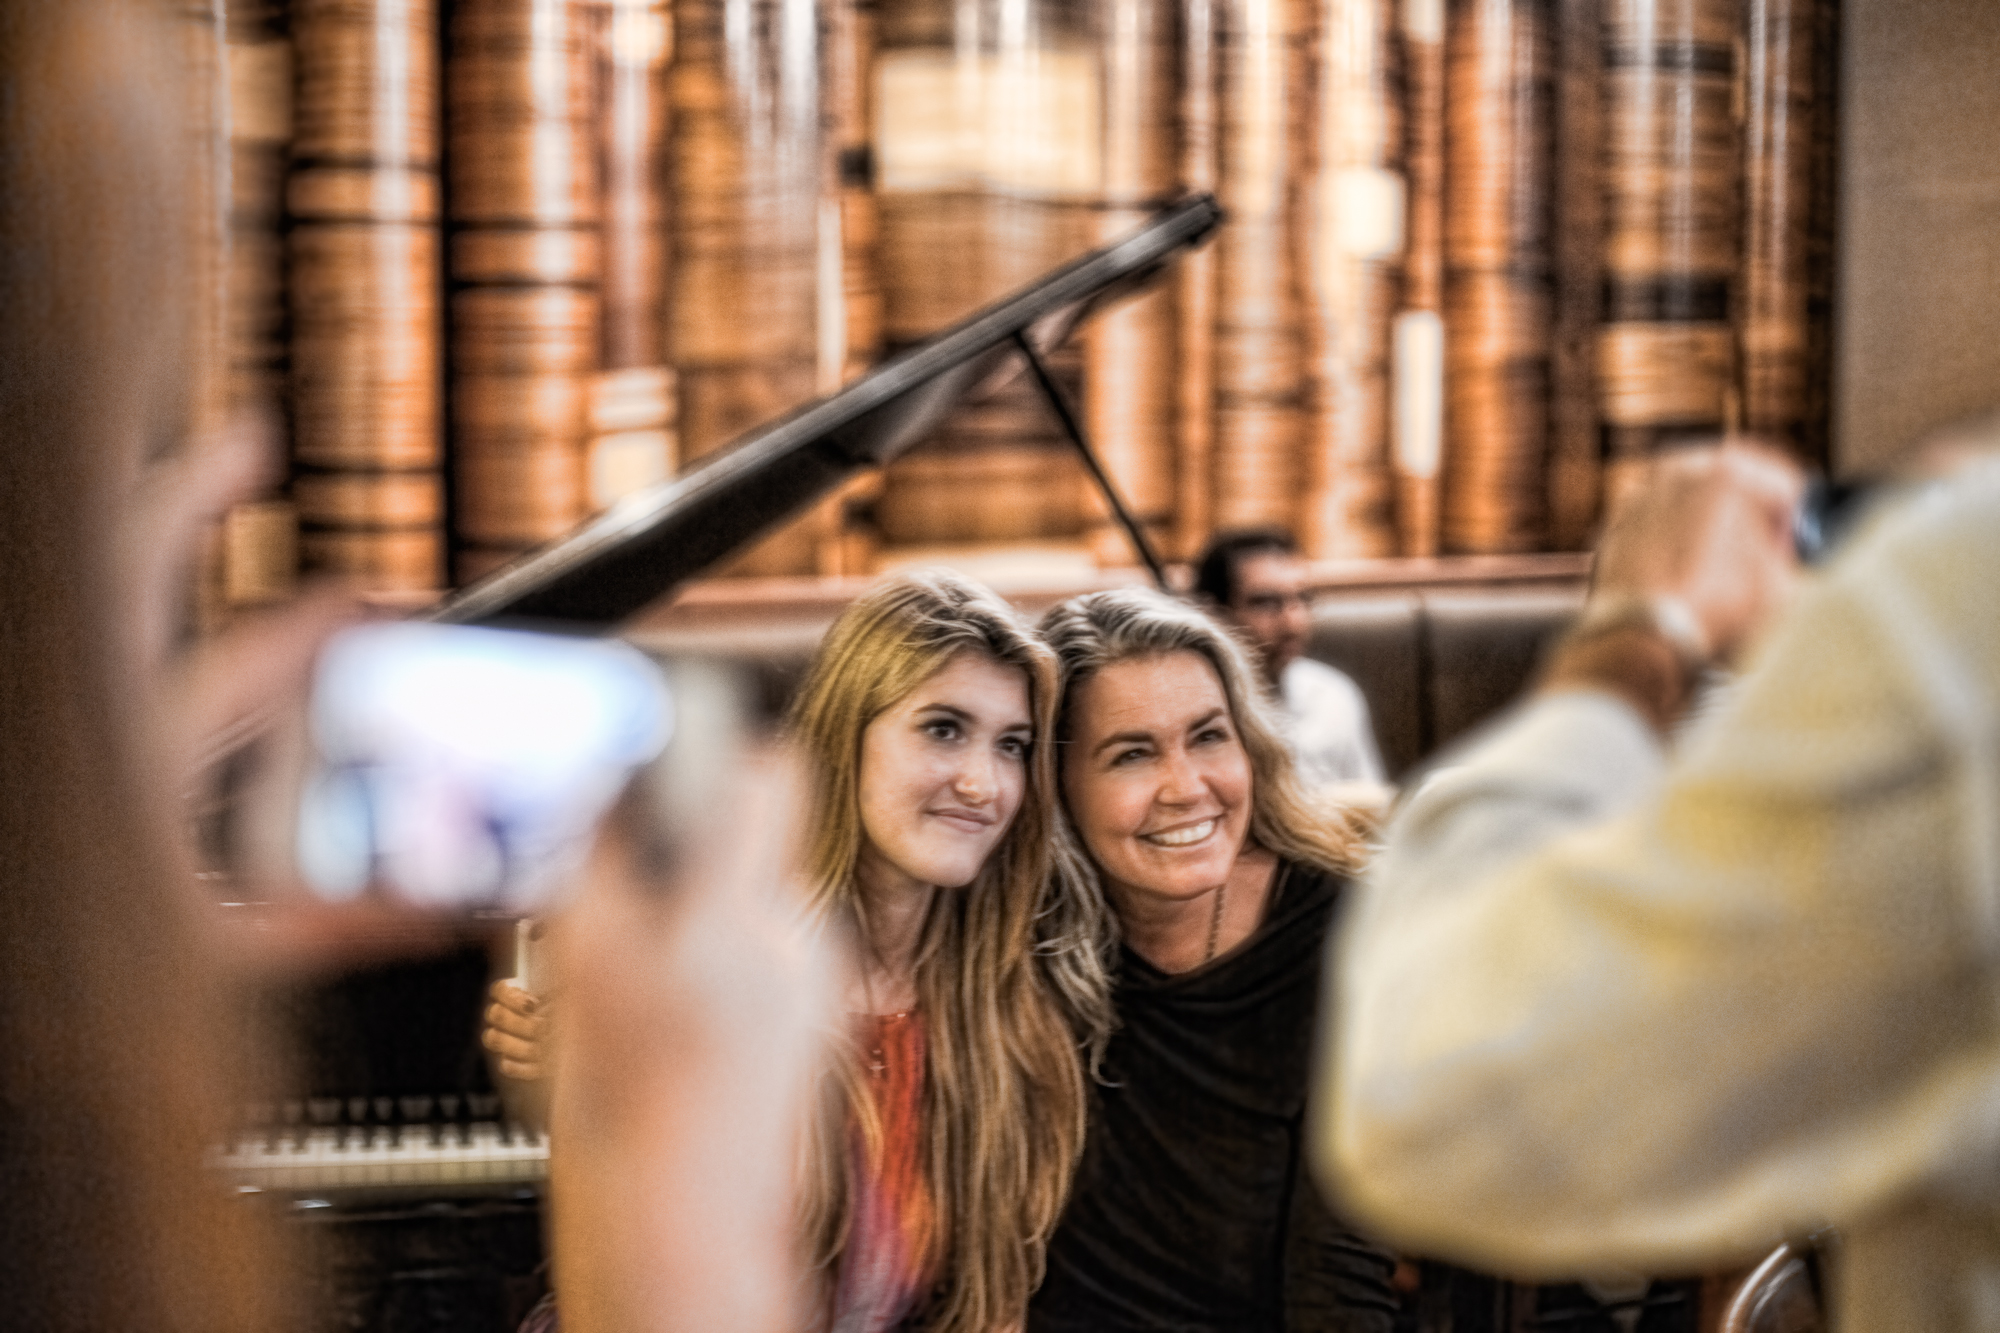 Director Bobbi Jo Hart with concert pianist Marika Bournaki at Lincoln Center for the New York premiere of I AM NOT A ROCK STAR, which was followed by a live performance by Marika, the protagonist of the documentary Hart shot over 7 years.